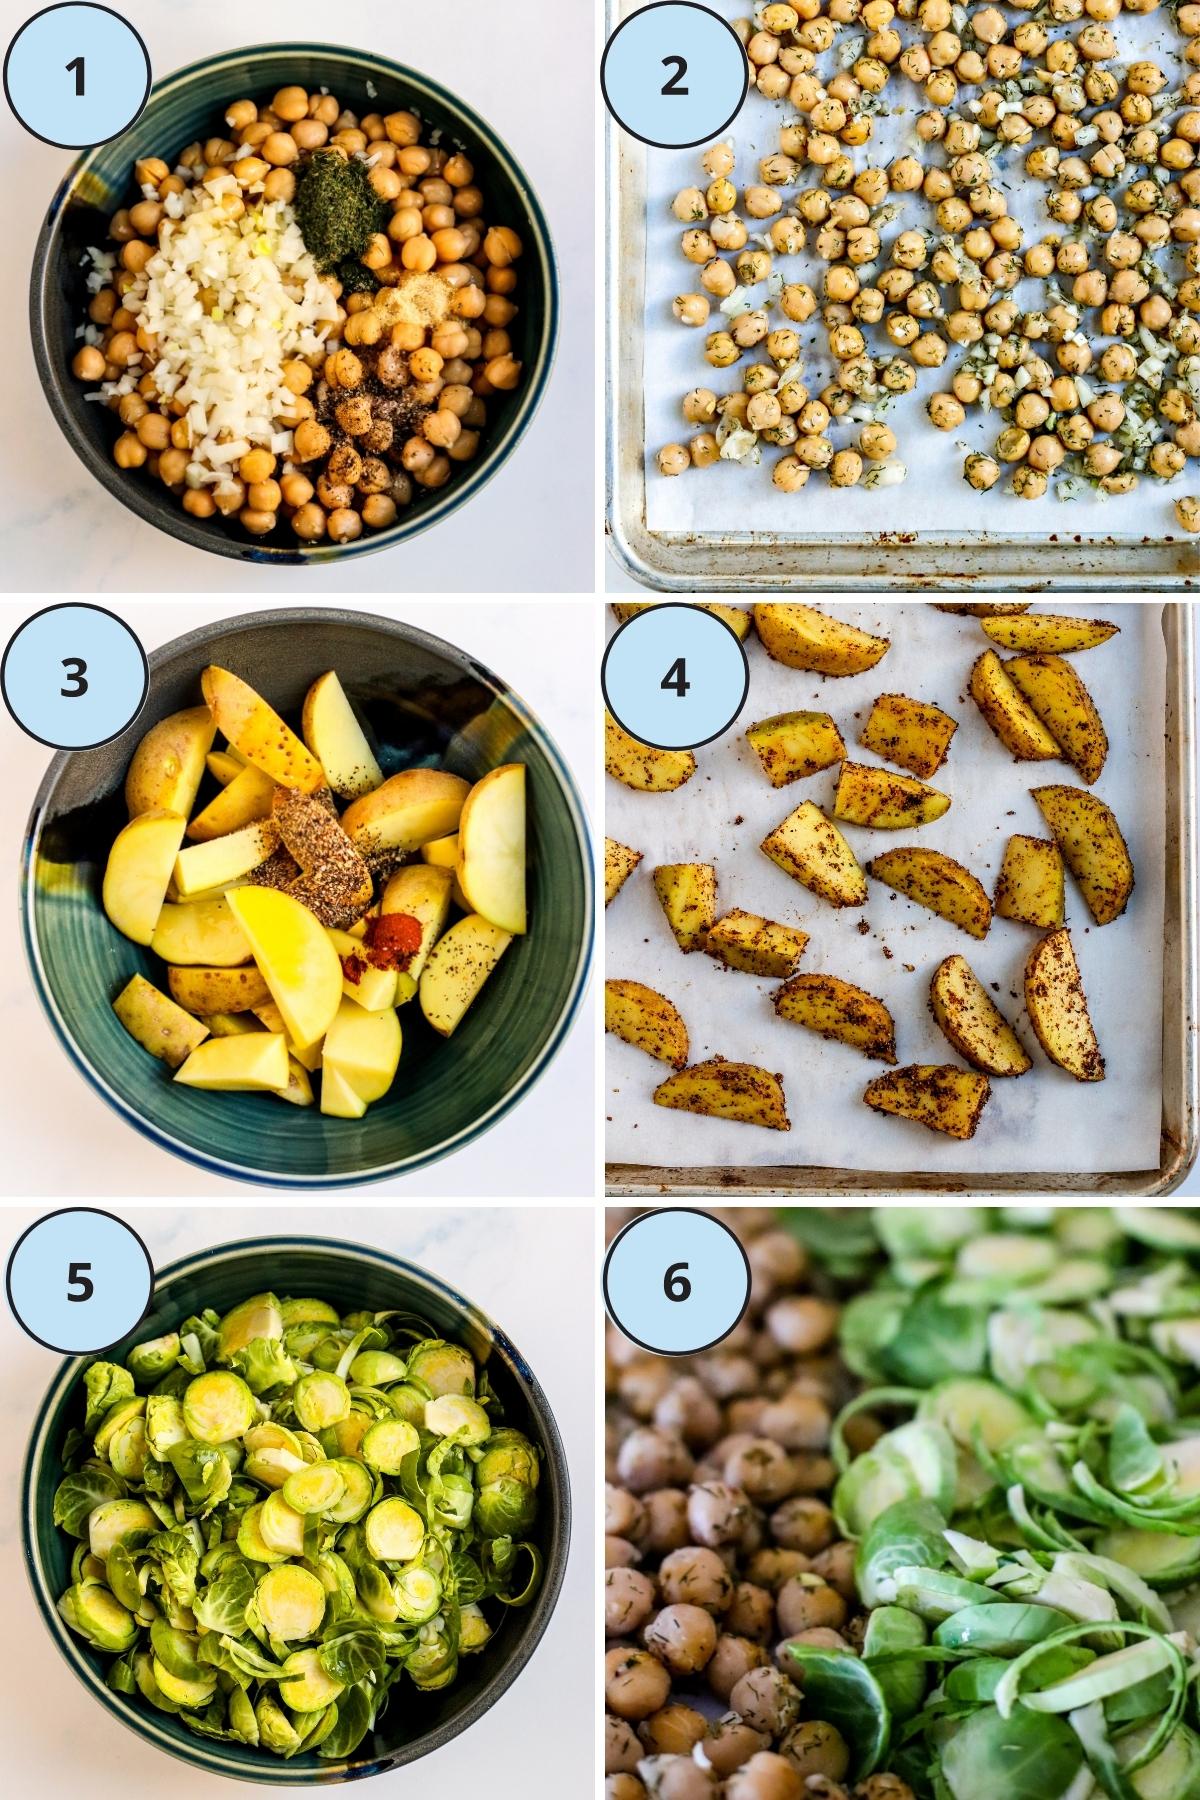 Collage of 6 numbered images showing how to make this recipe.